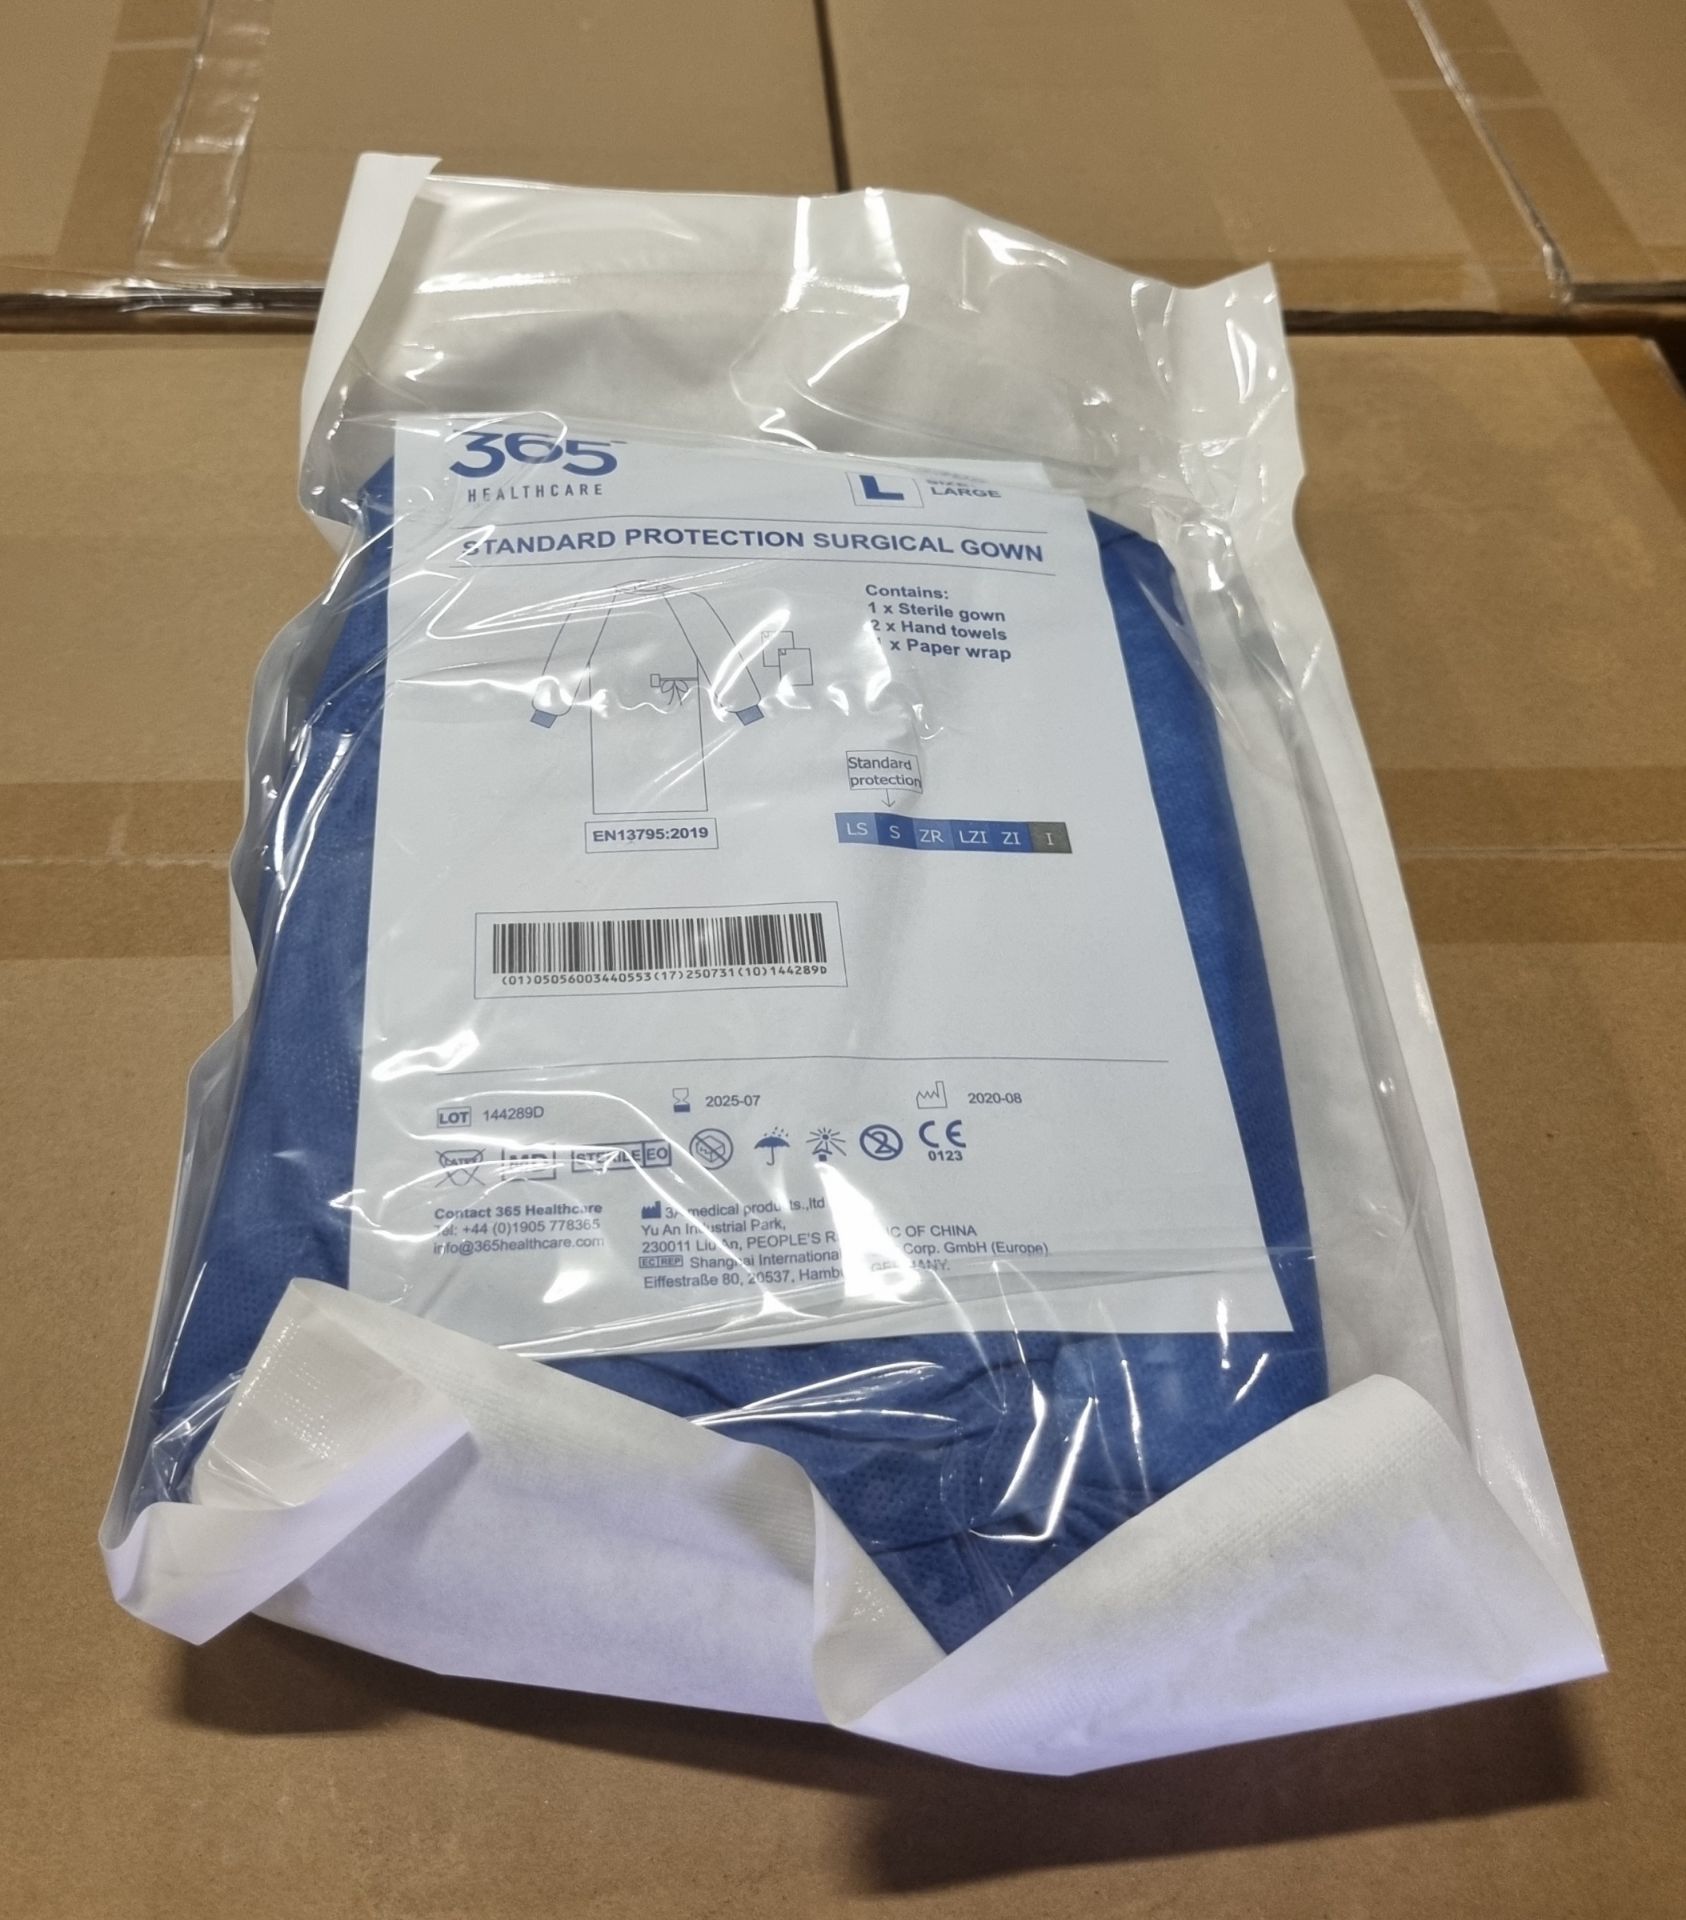 25x boxes of 365 Healthcare standard protection surgical gowns - large - expiration date: 07/2025 - Image 5 of 5